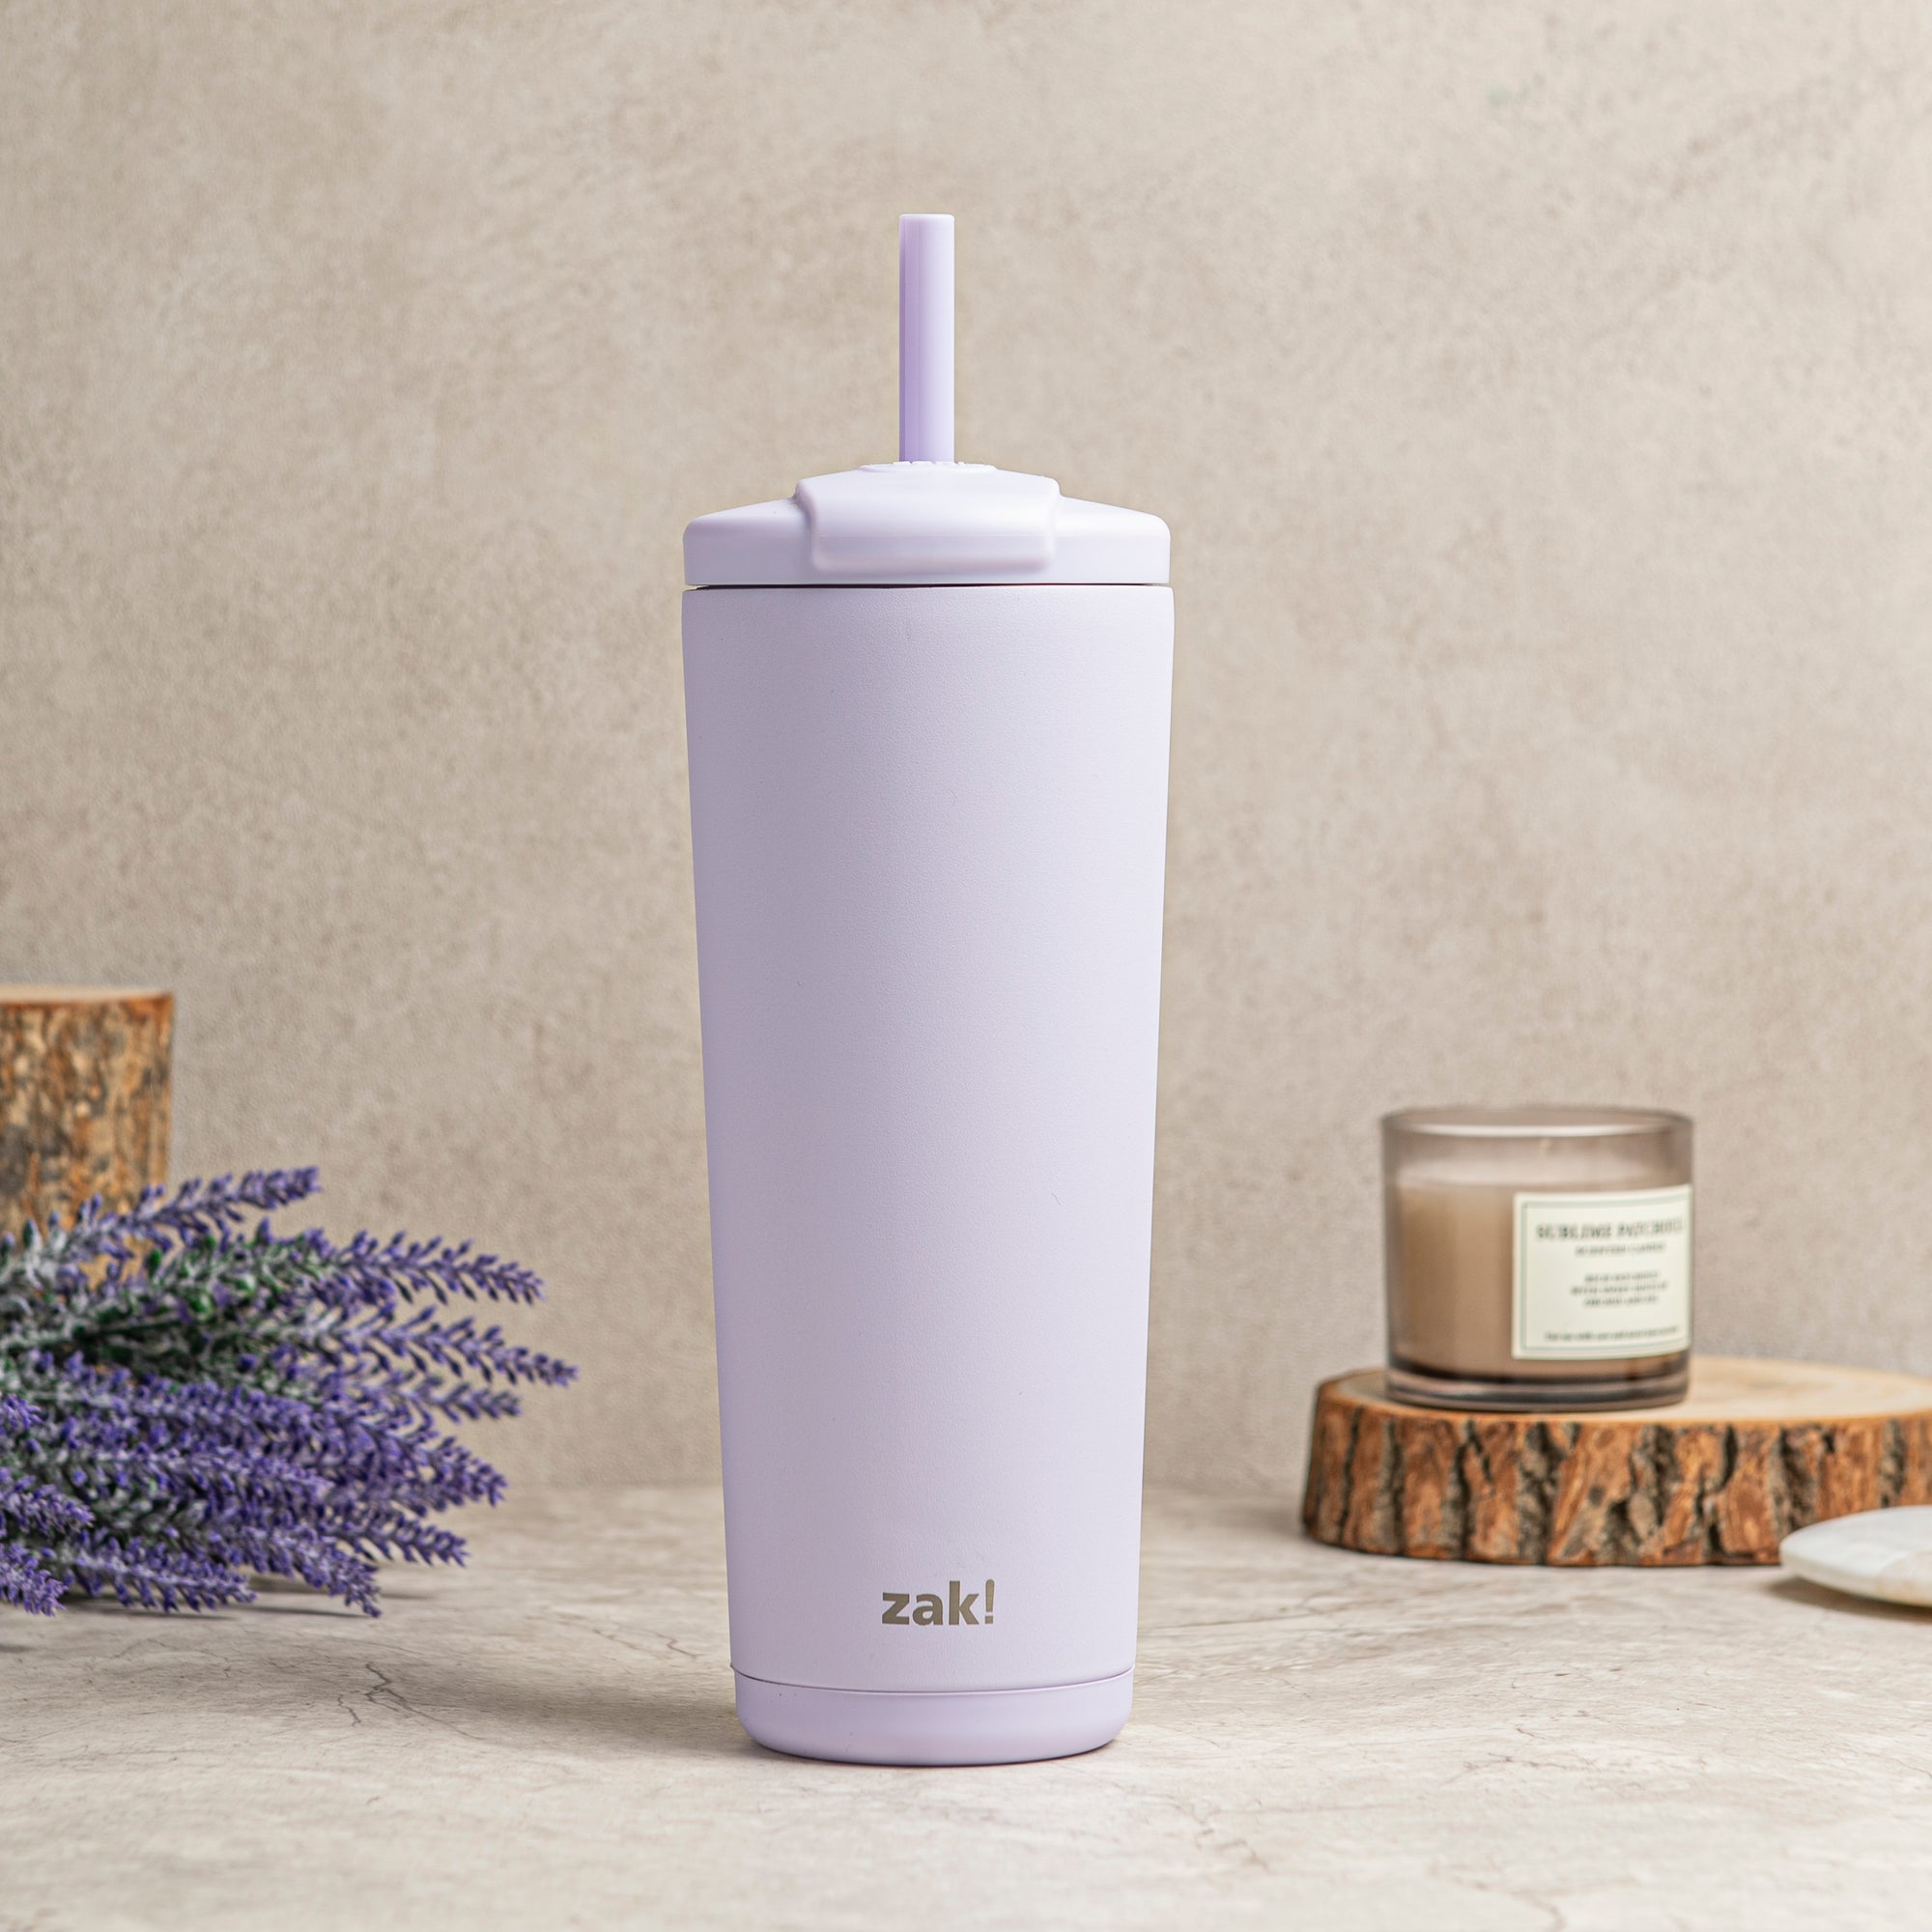 Beacon Insulated Cold Beverage Straw Tumbler - Smoky Lilac, 24 ounces